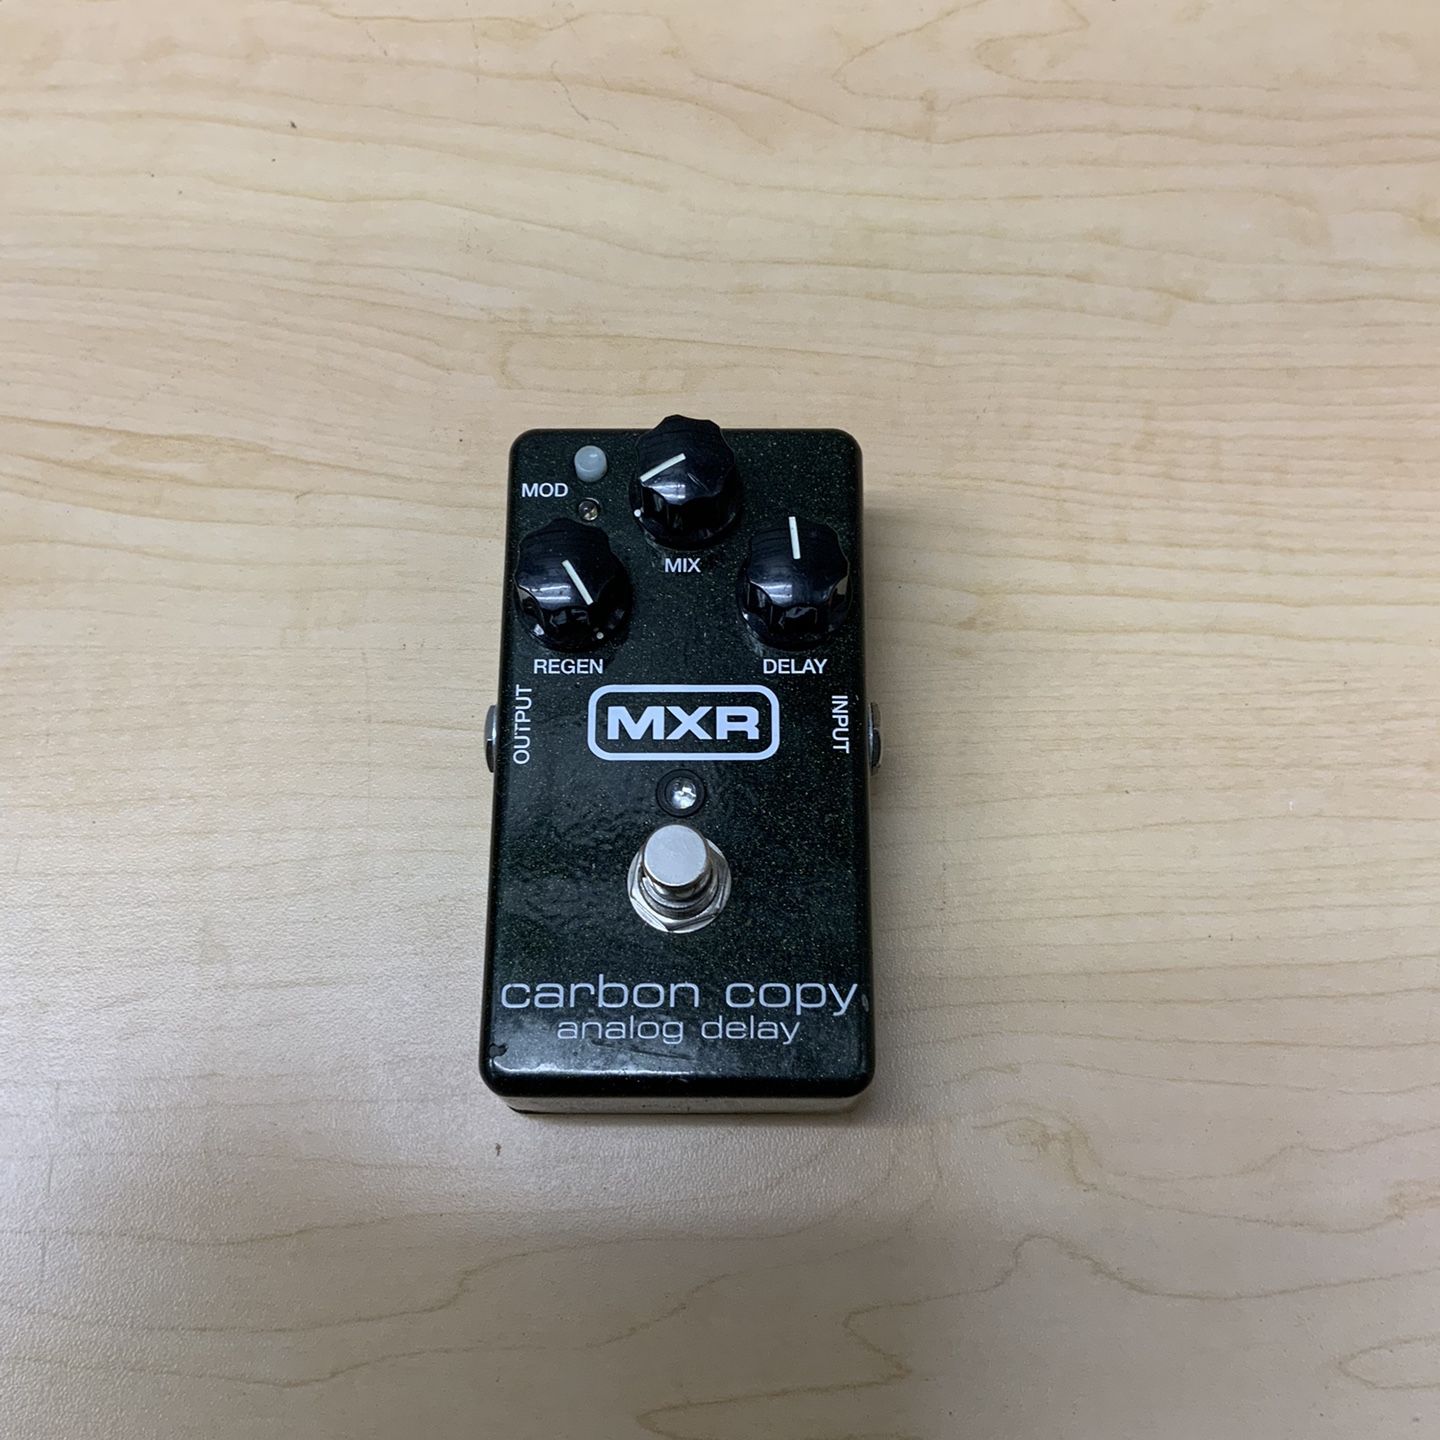 MXR M169 Carbon Copy Analog Delay Effects Pedal - Guitar Artist Electric Pedal - Battery Operated 9V 